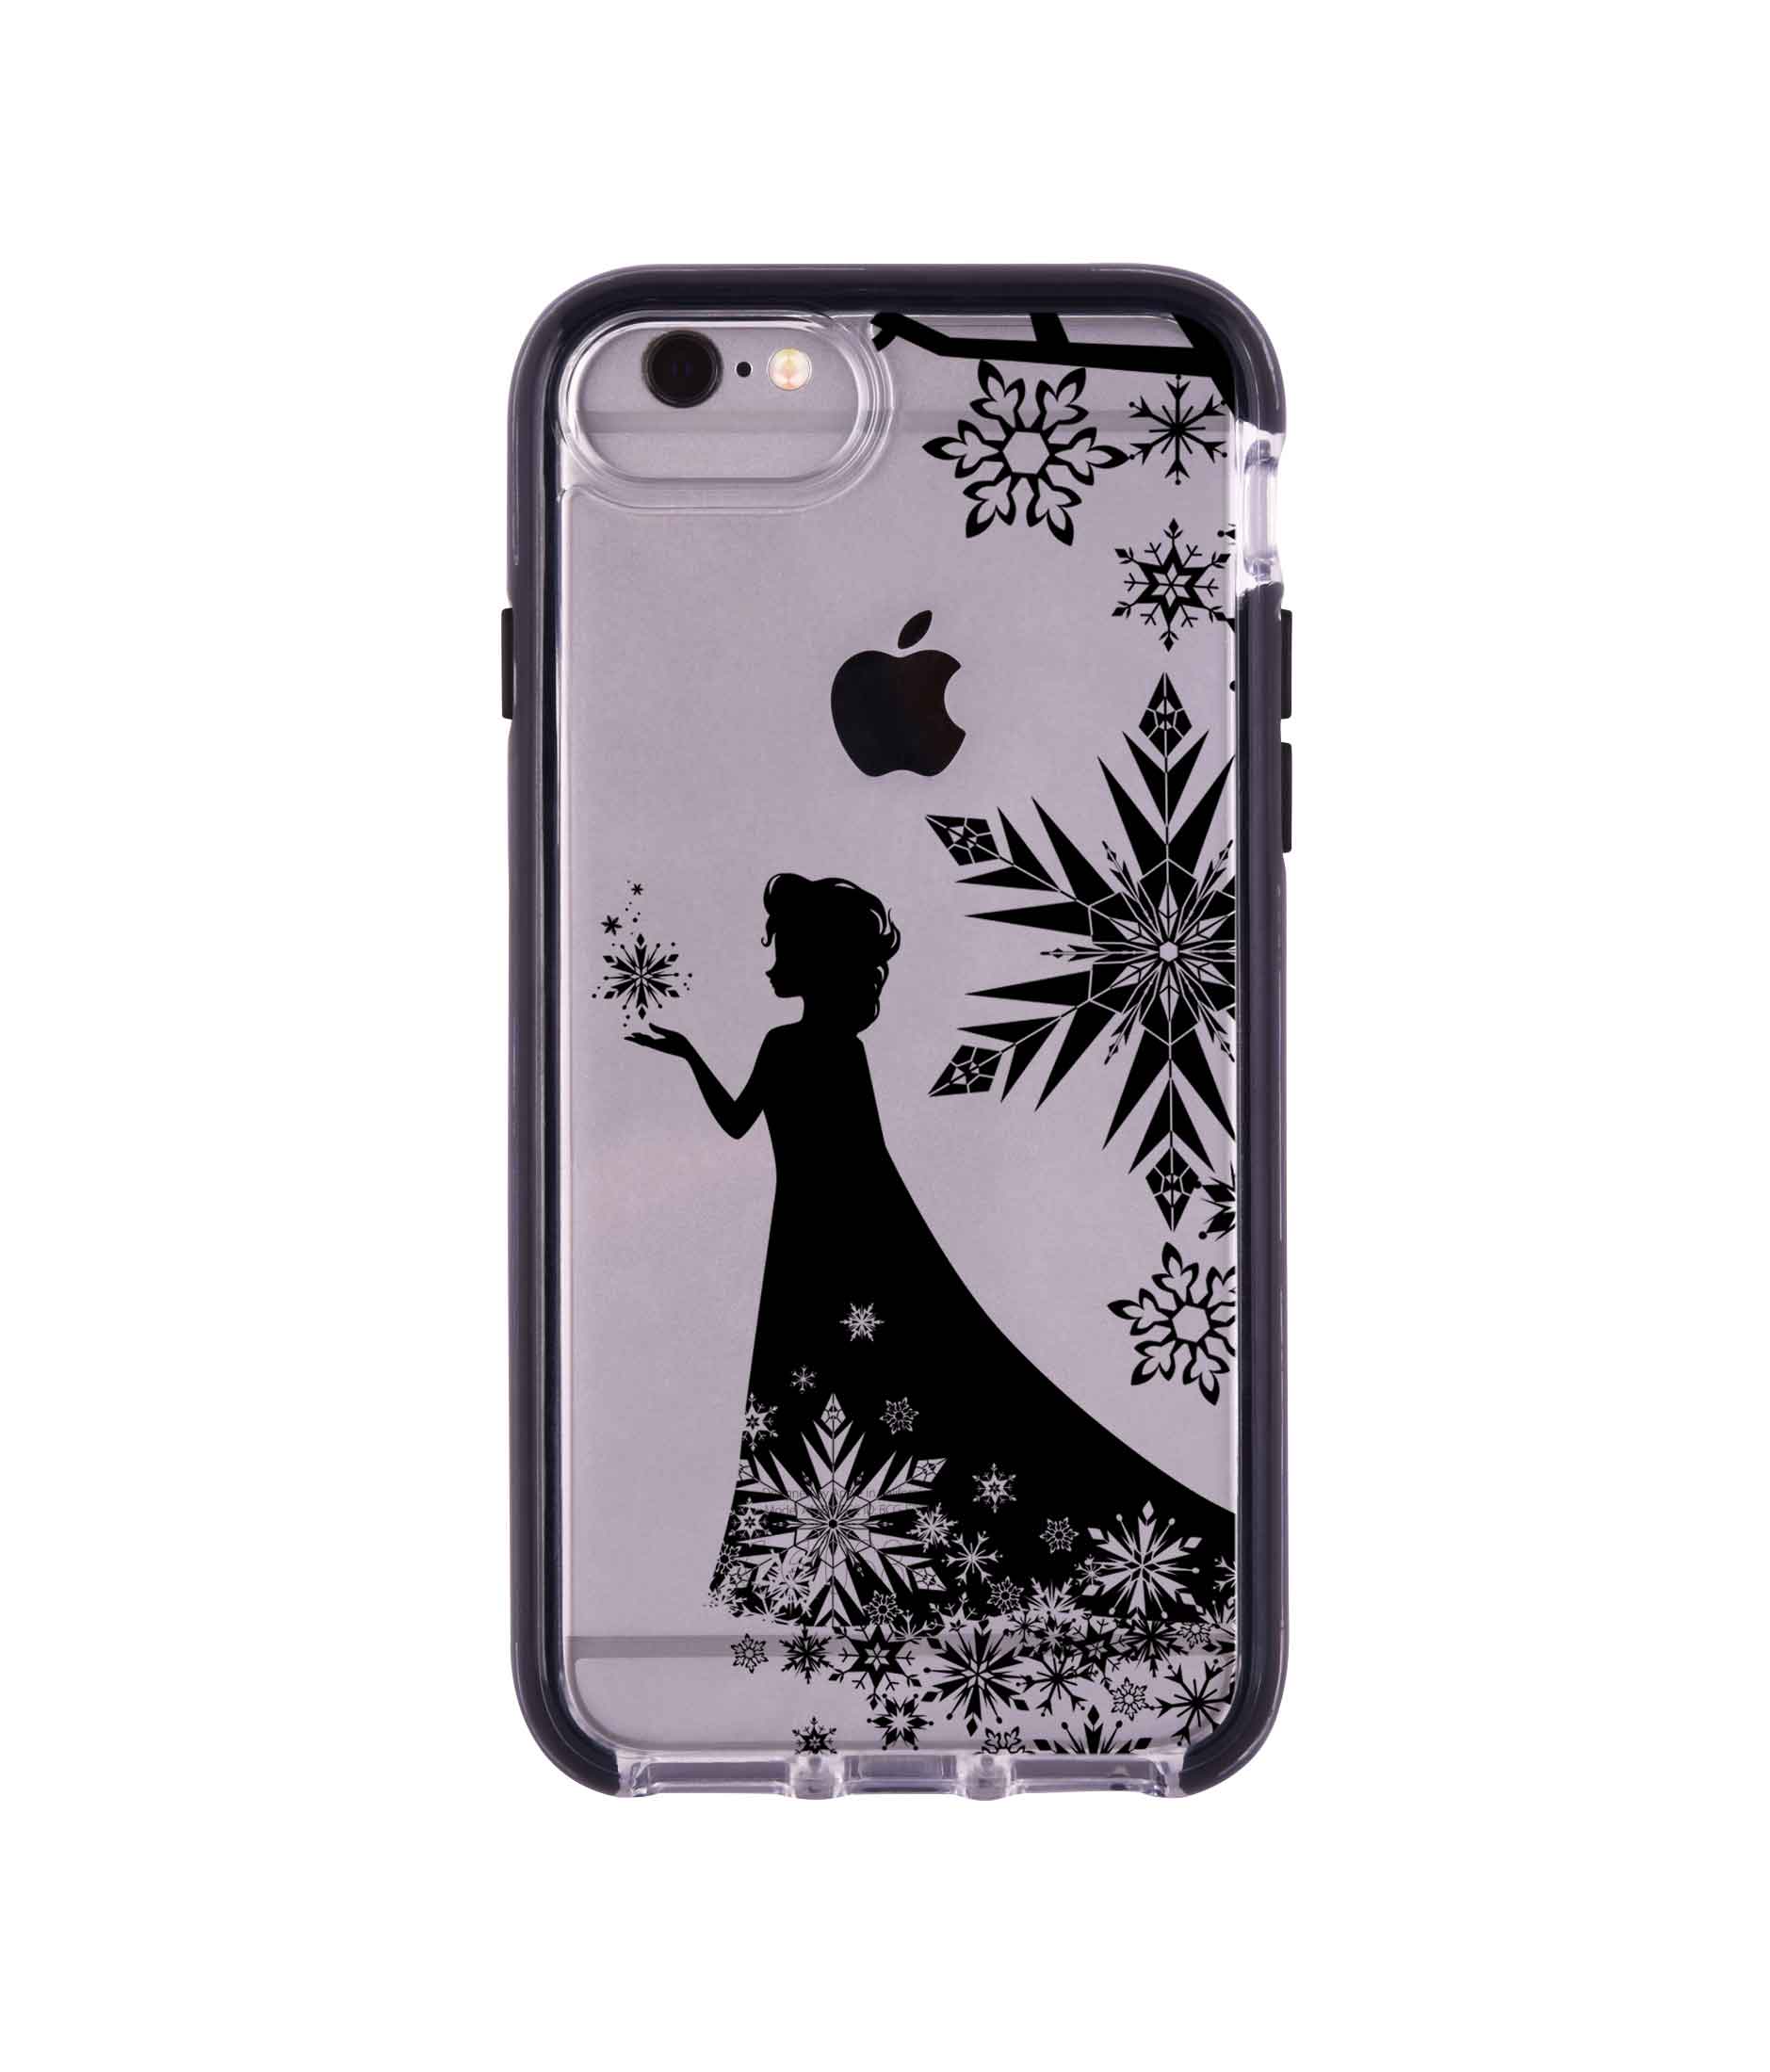 Elsa Silhouette - Extreme Phone Case for iPhone 6